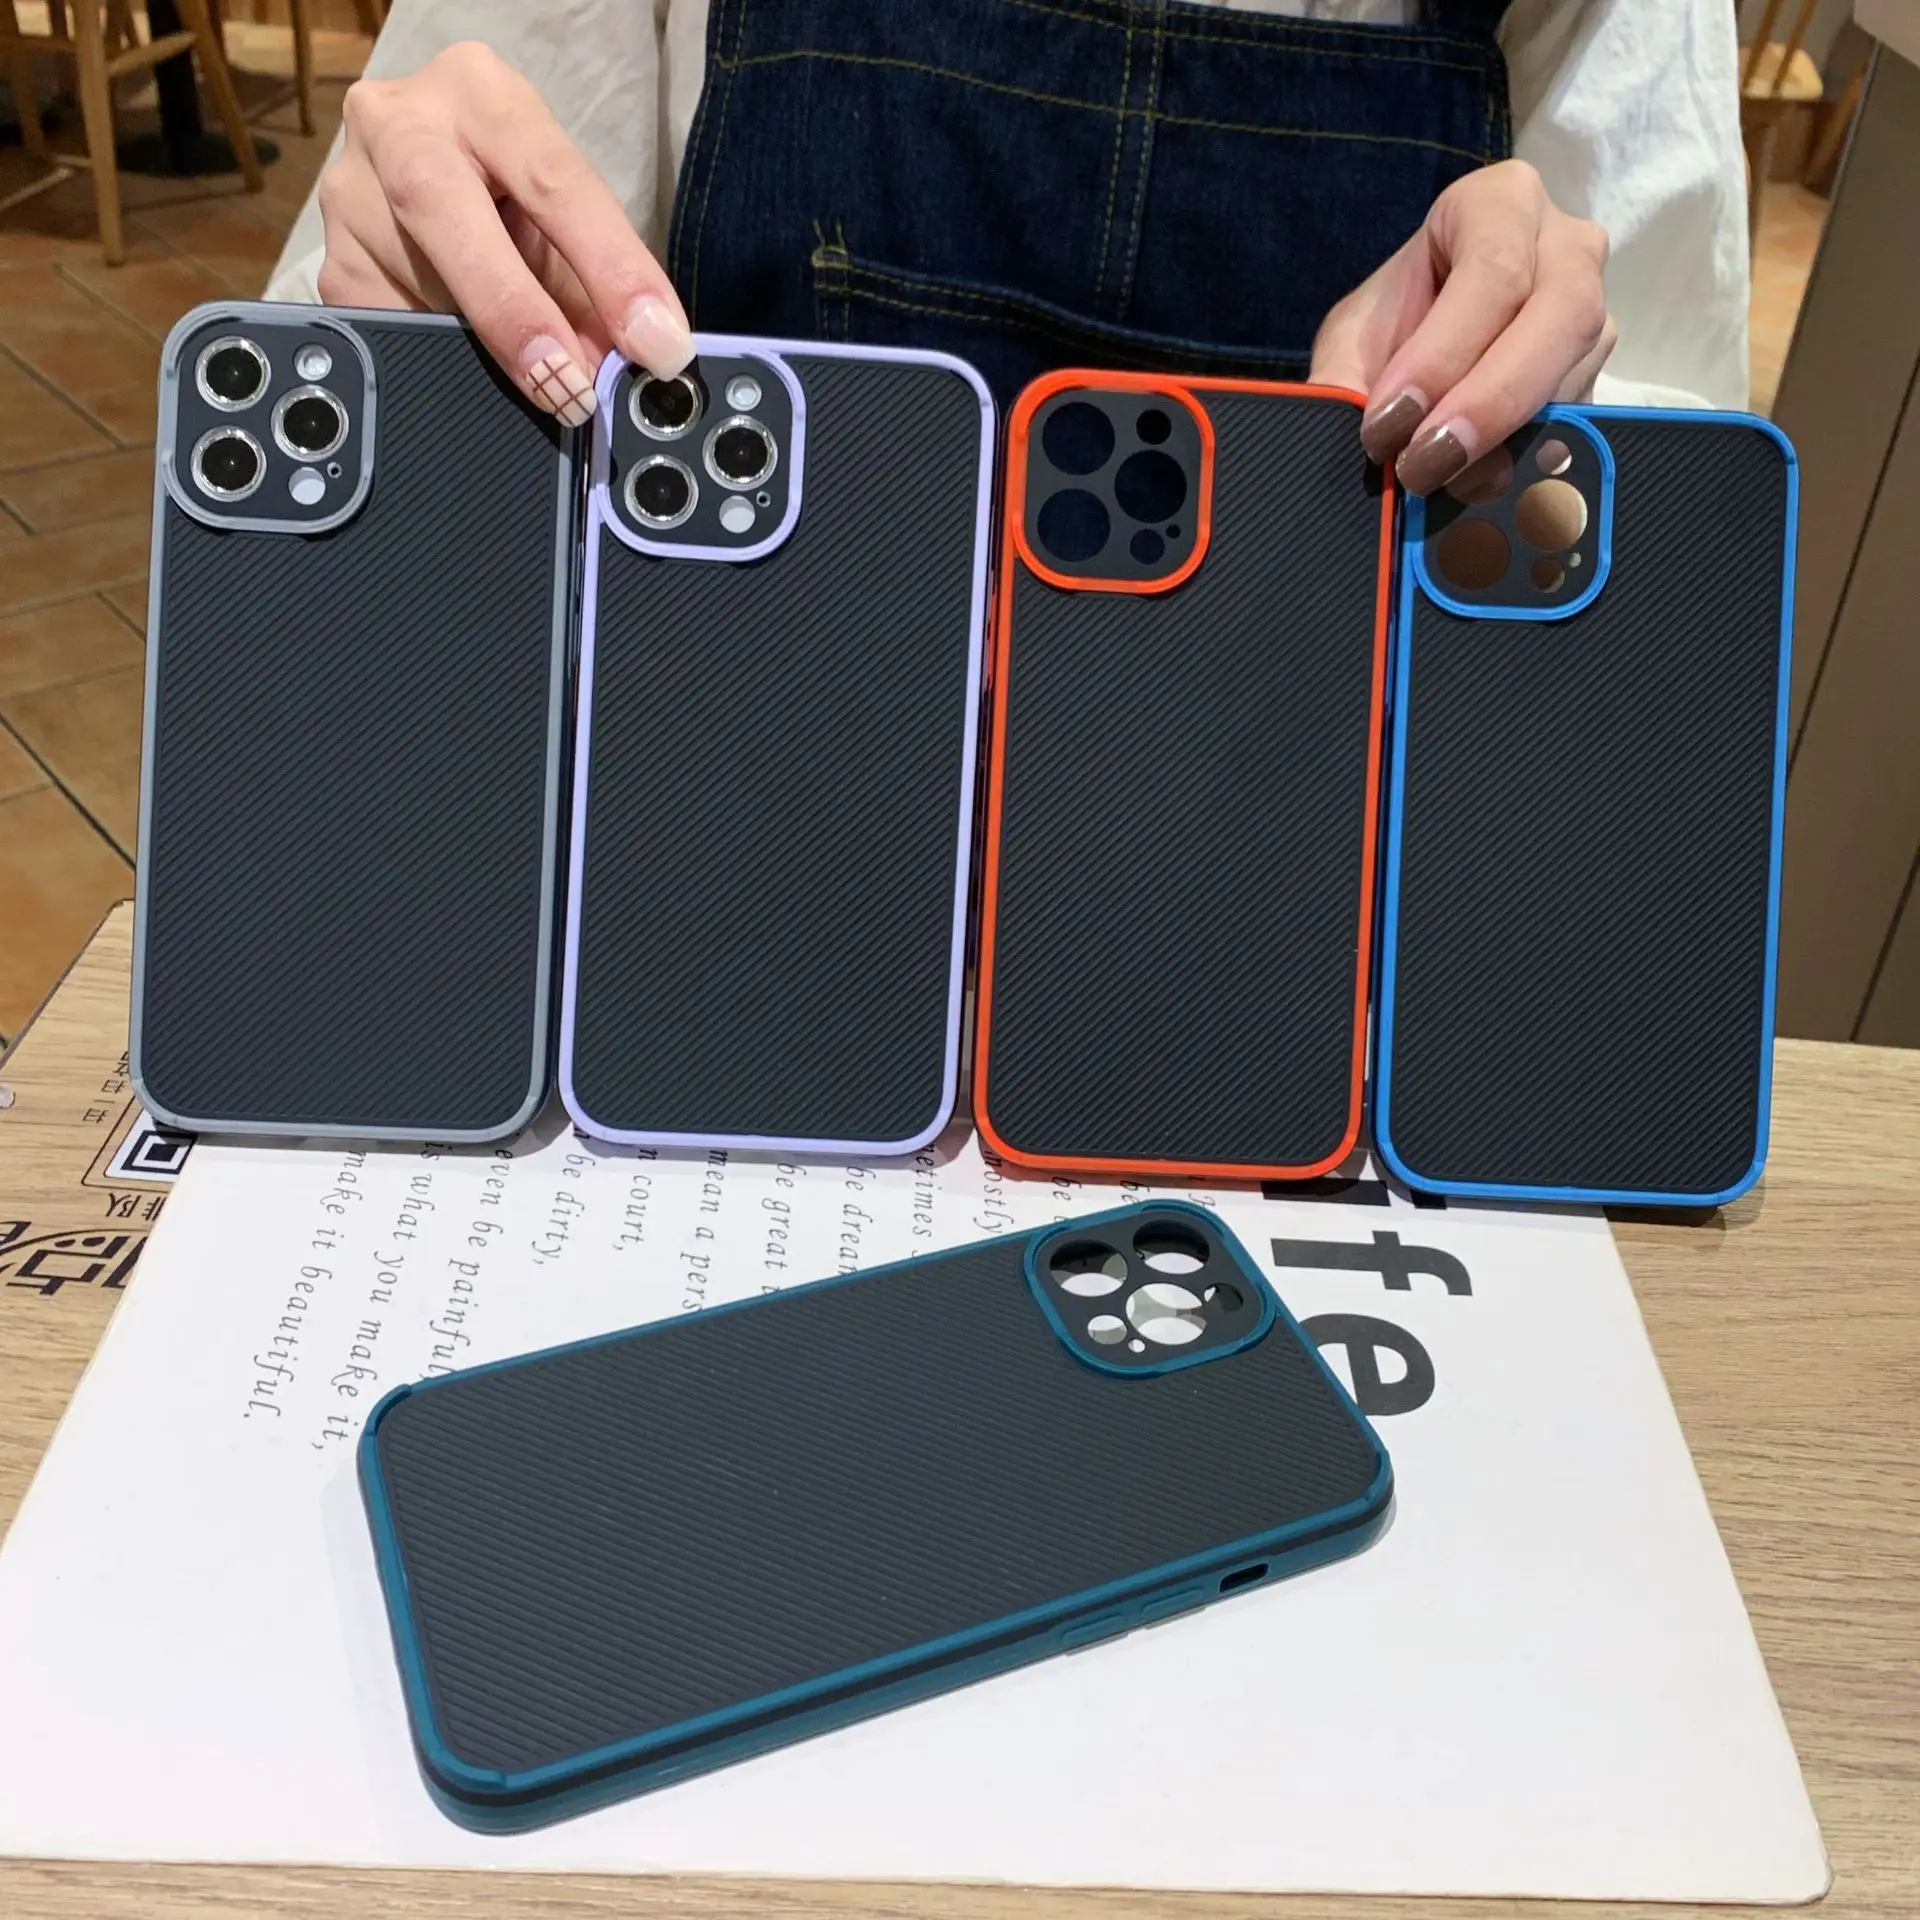 

Fashion Double Color Carbon Fiber Silicone Mobile phone Case For iPhone 11 12 13 Pro Max Xs Max Back Cover, As picture shows